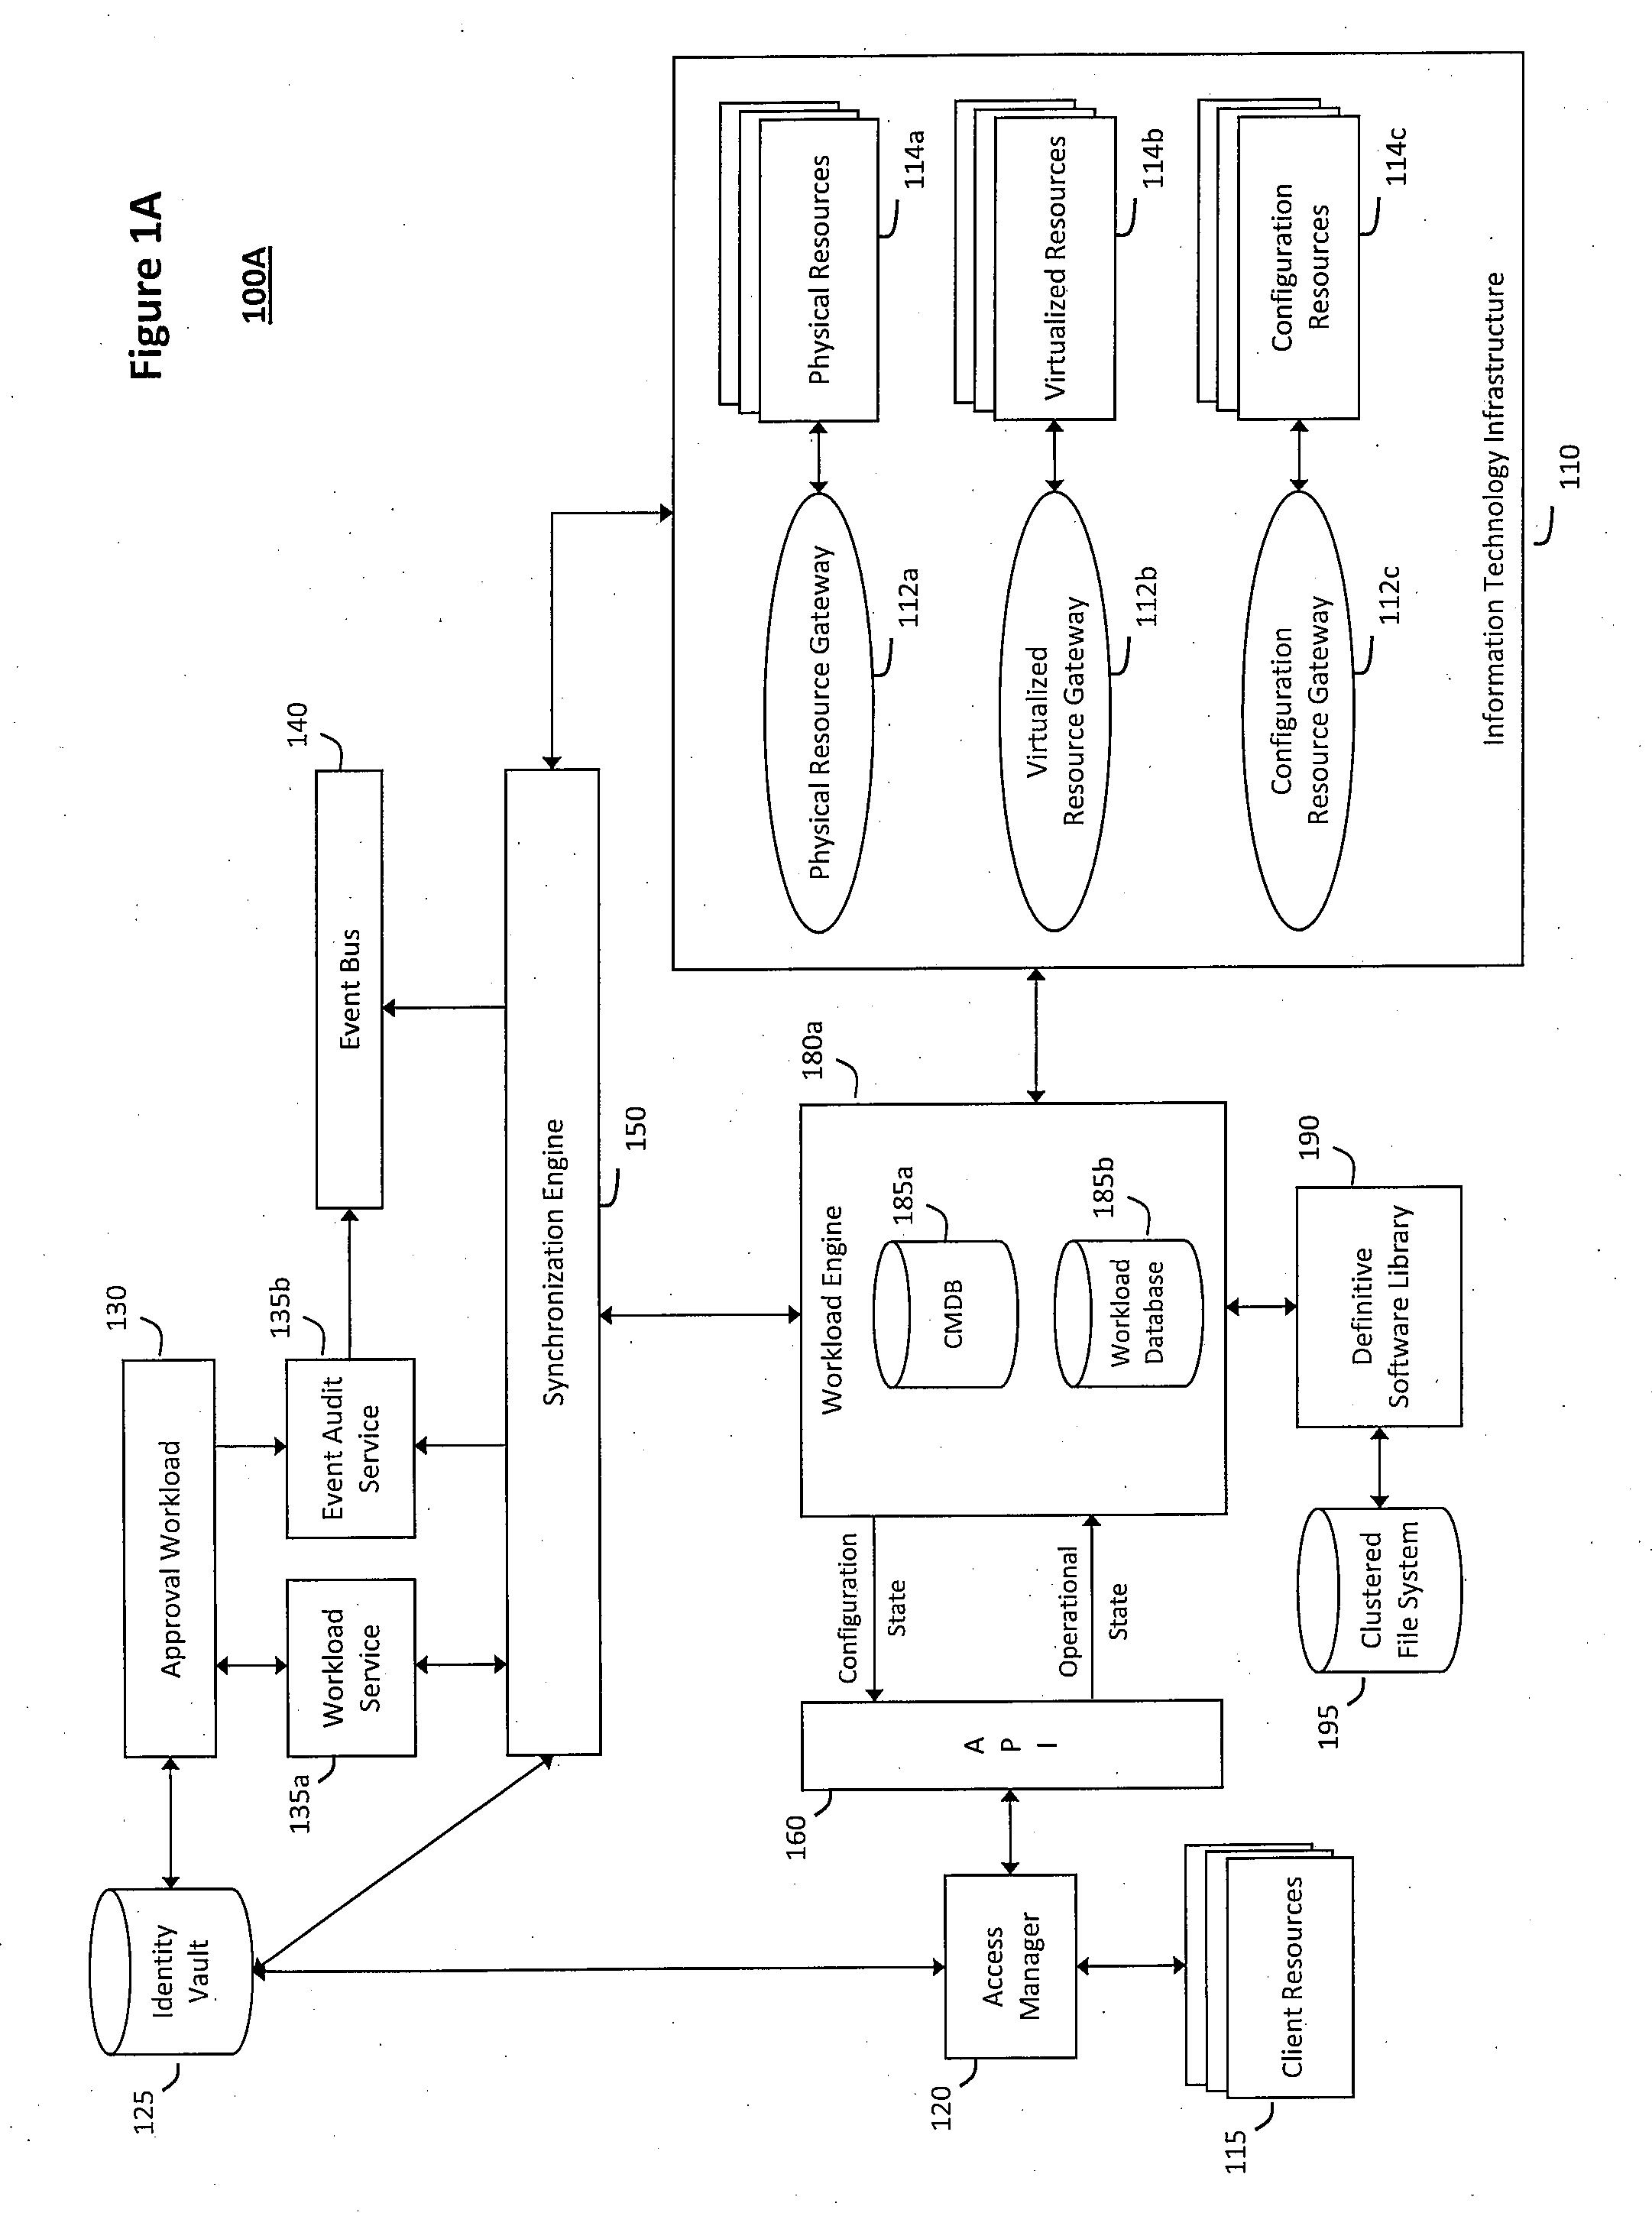 System and method for controlling cloud and virtualized data centers in an intelligent workload management system